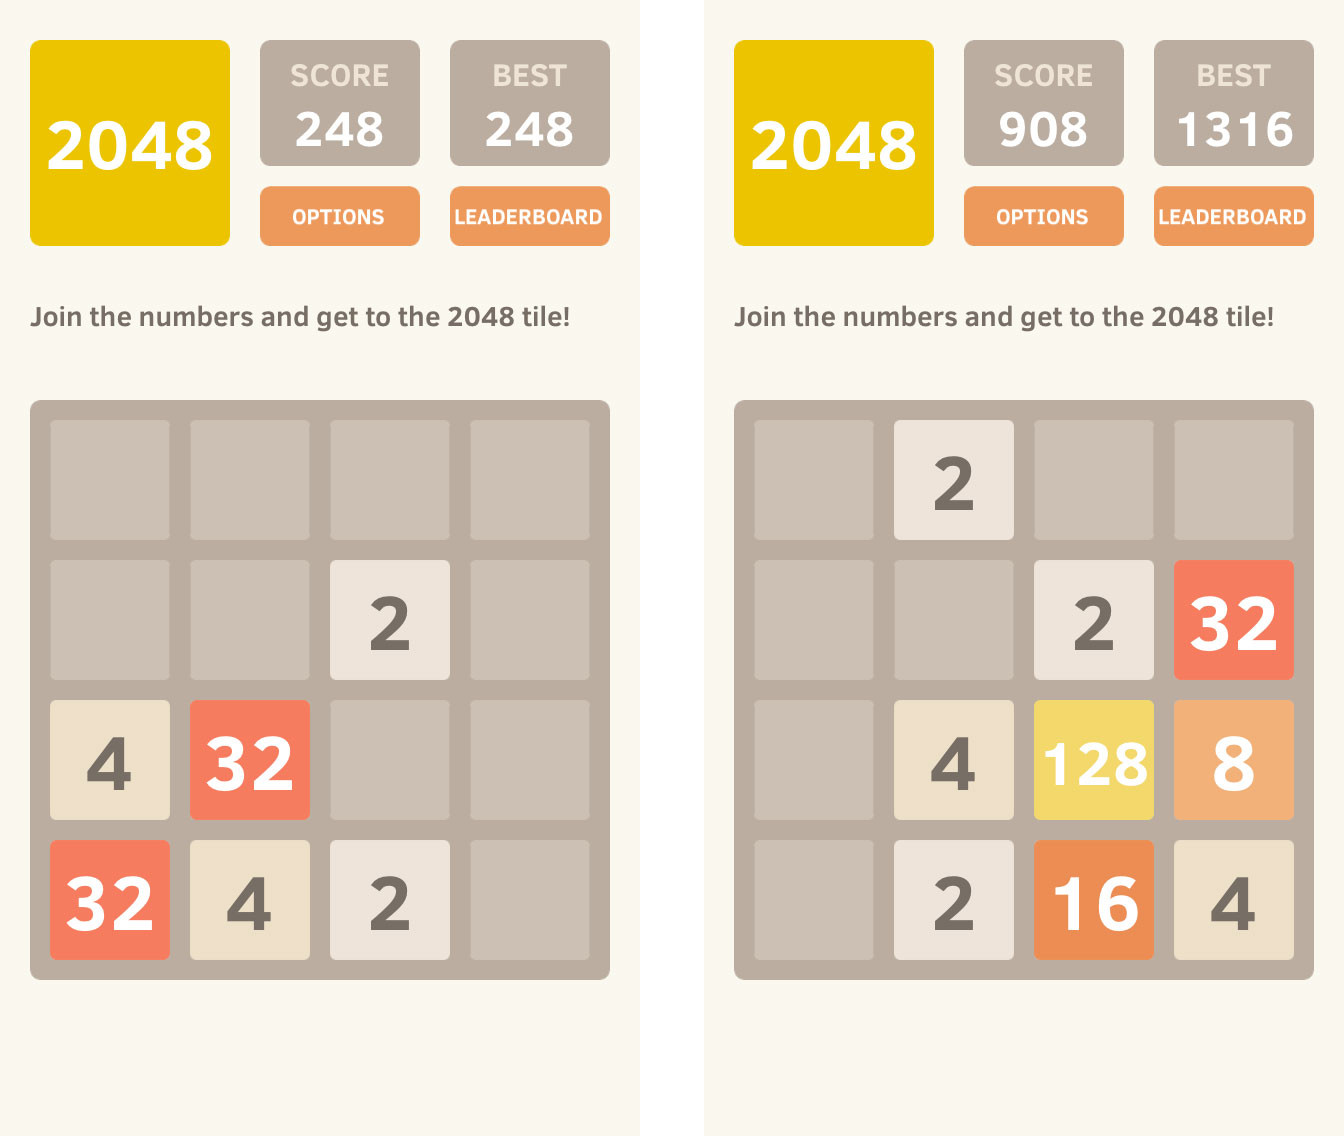 How To Beat 2048 (Best Strategy Tips For Beating 2048 Game Tile